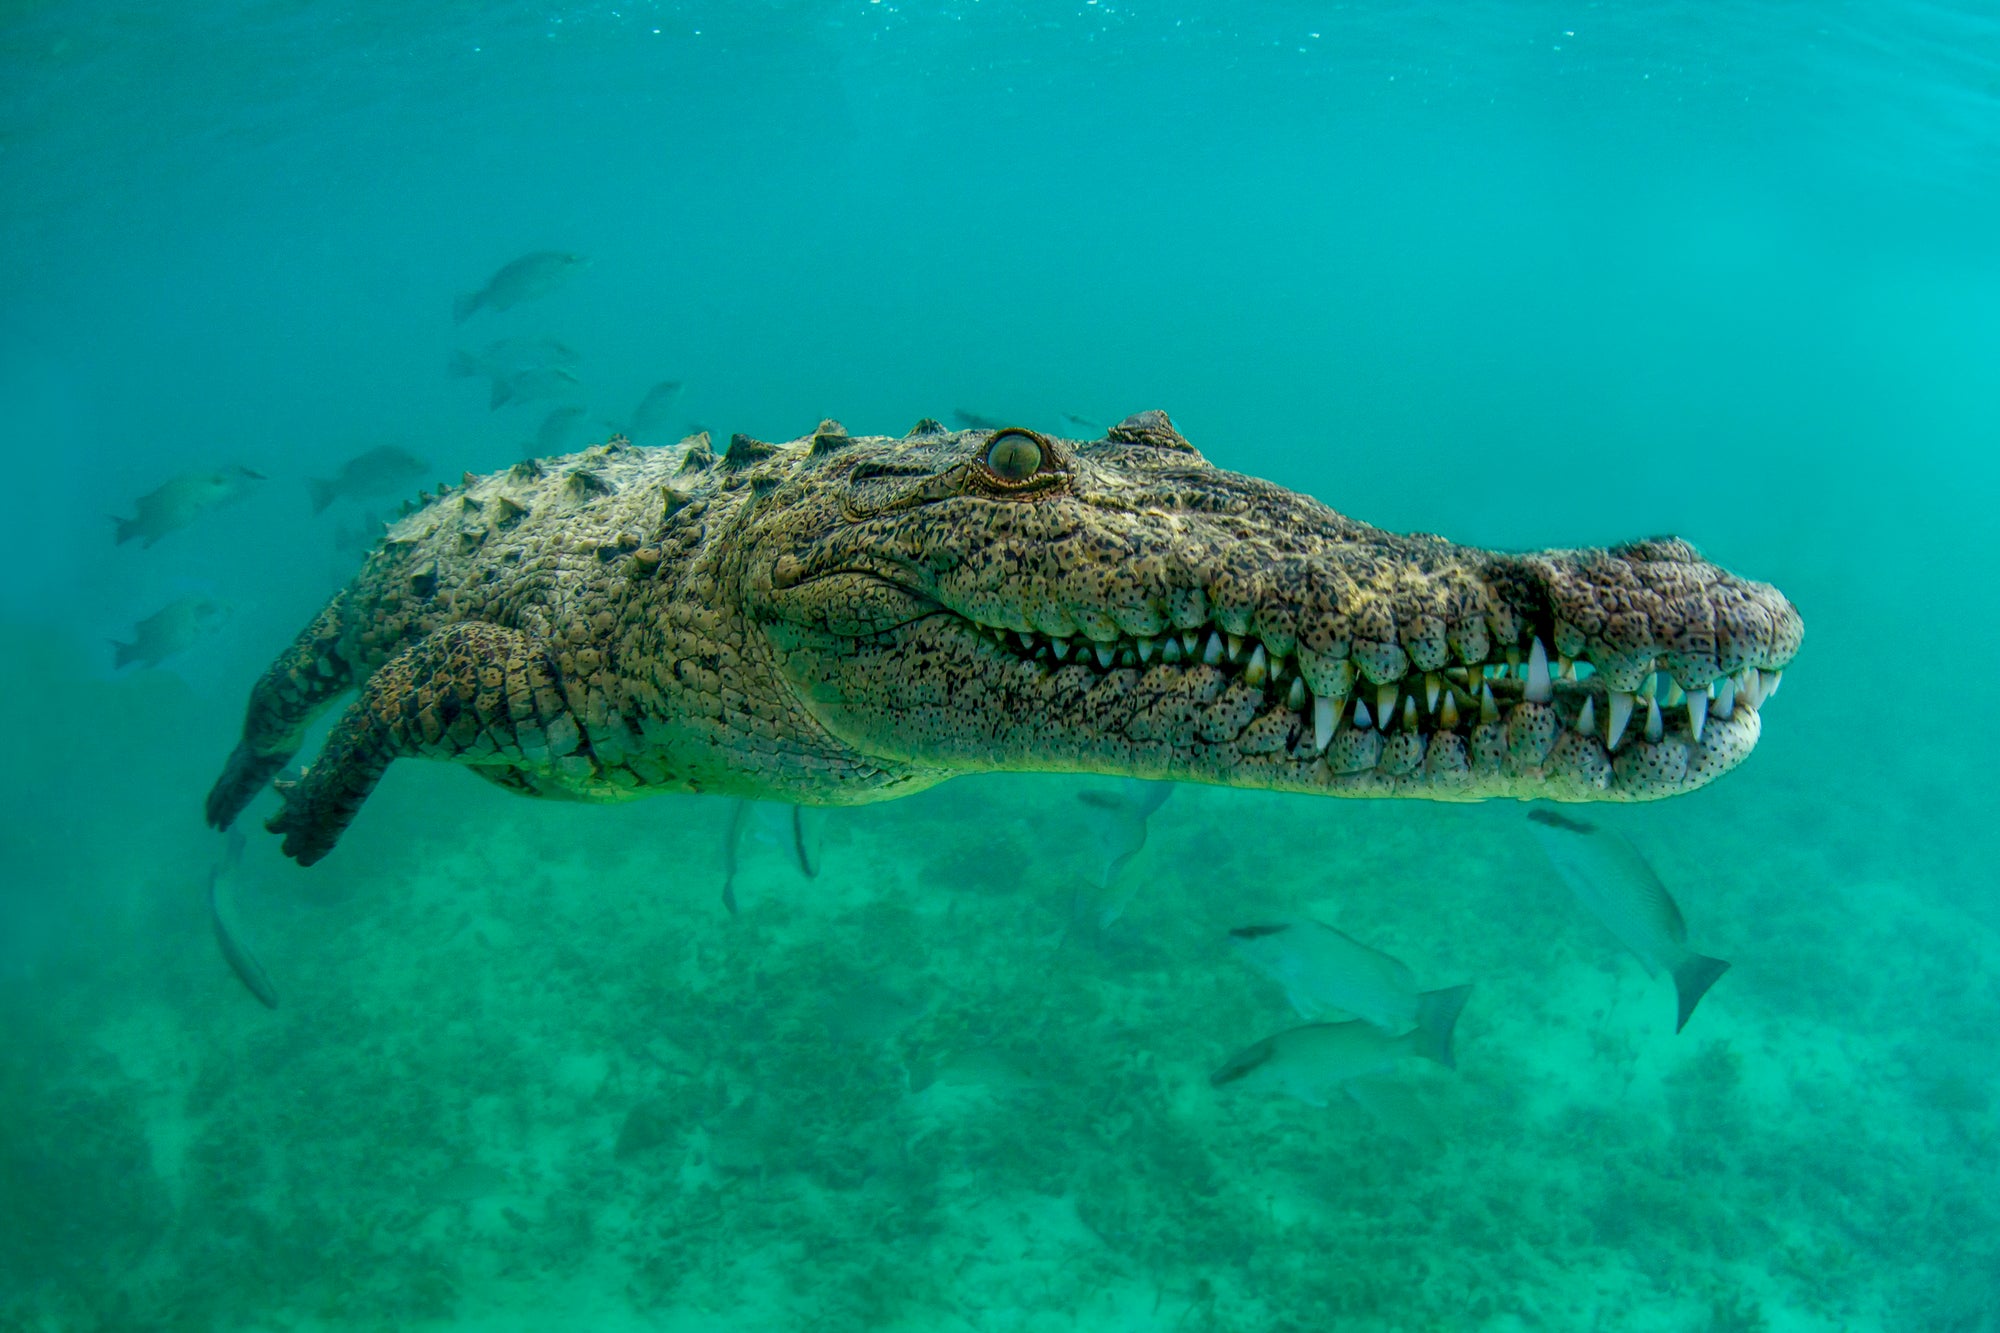 An underwater image of a crocodile swimming towards the camera taken at the Gardens of the Queen in Cuba.